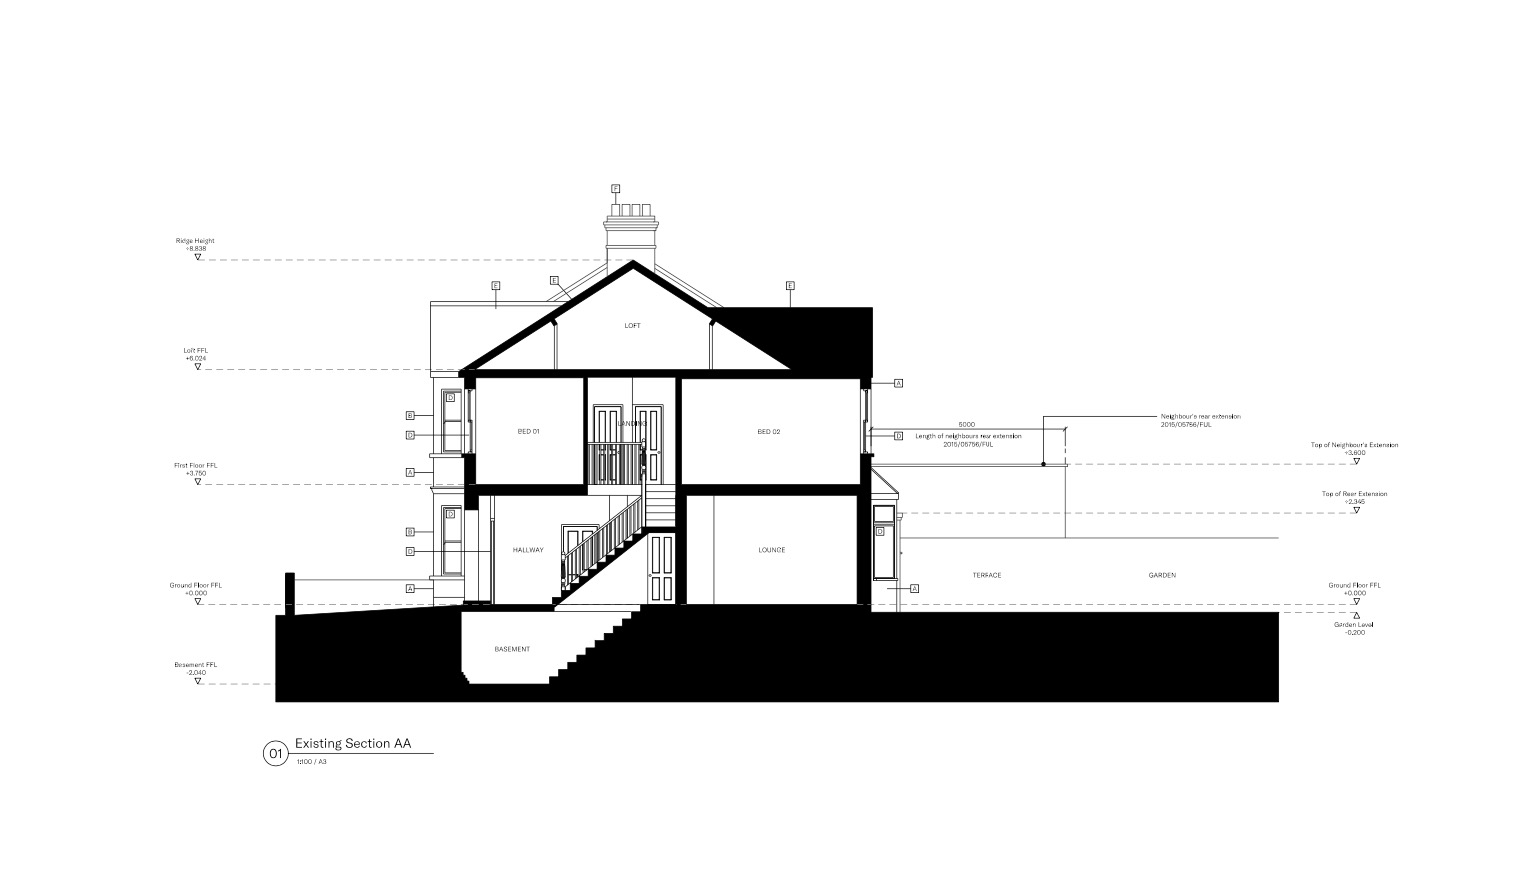 The fun and stress starts again, planning application submited. Screenshot 2019-05-27 at 12.49.45 - EletriciansForums.net